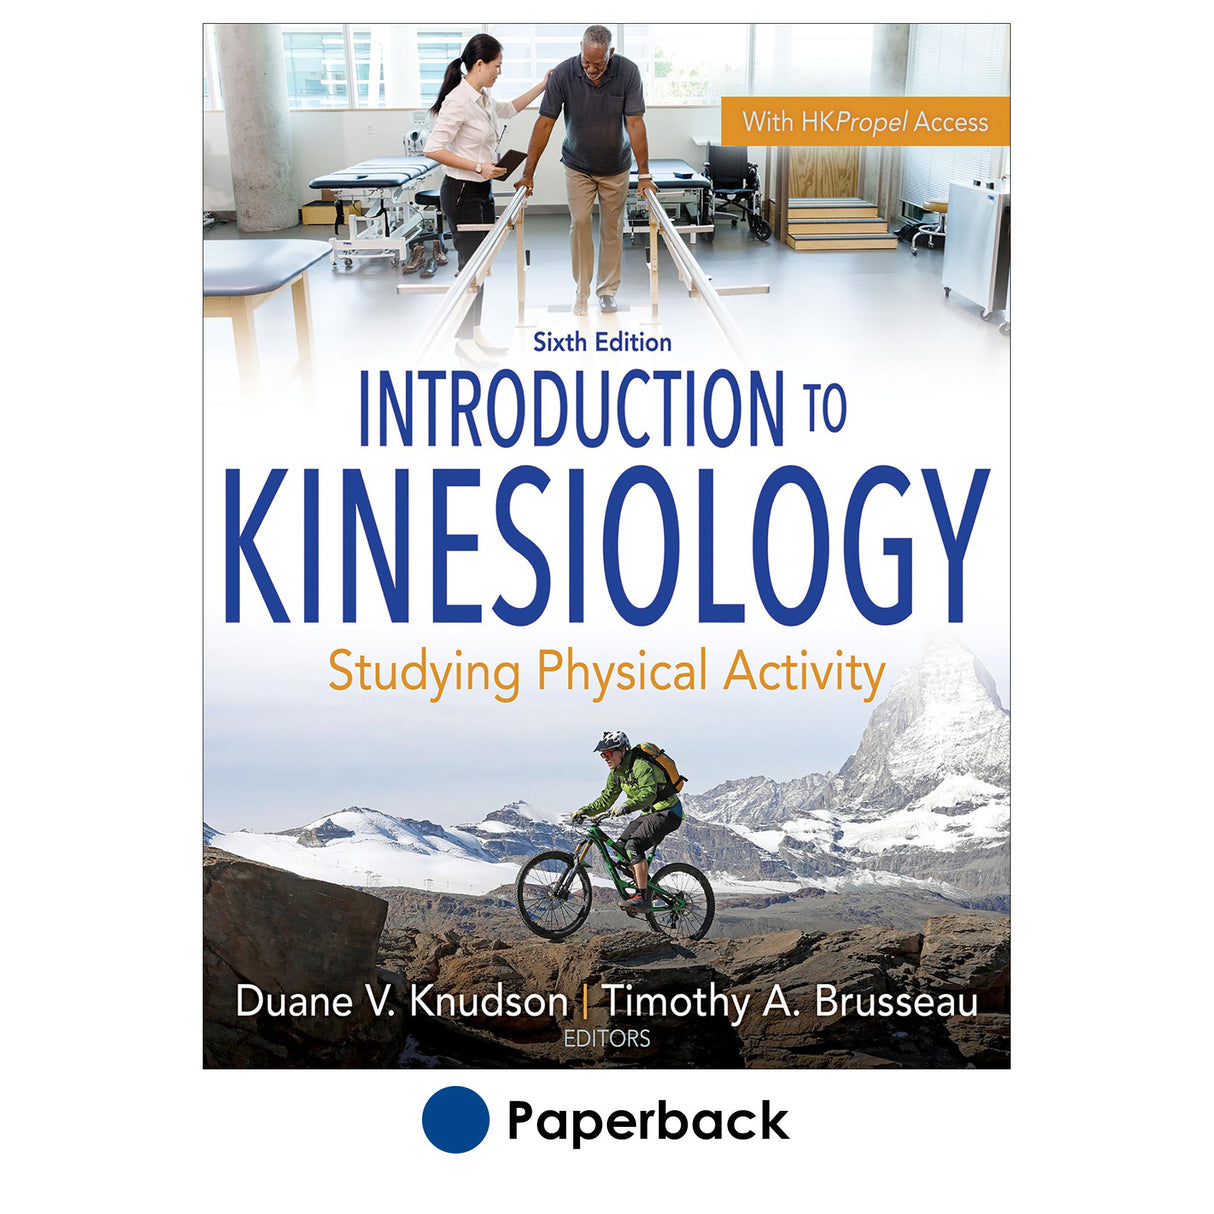 Introduction to Kinesiology 6th Edition With HKPropel Access